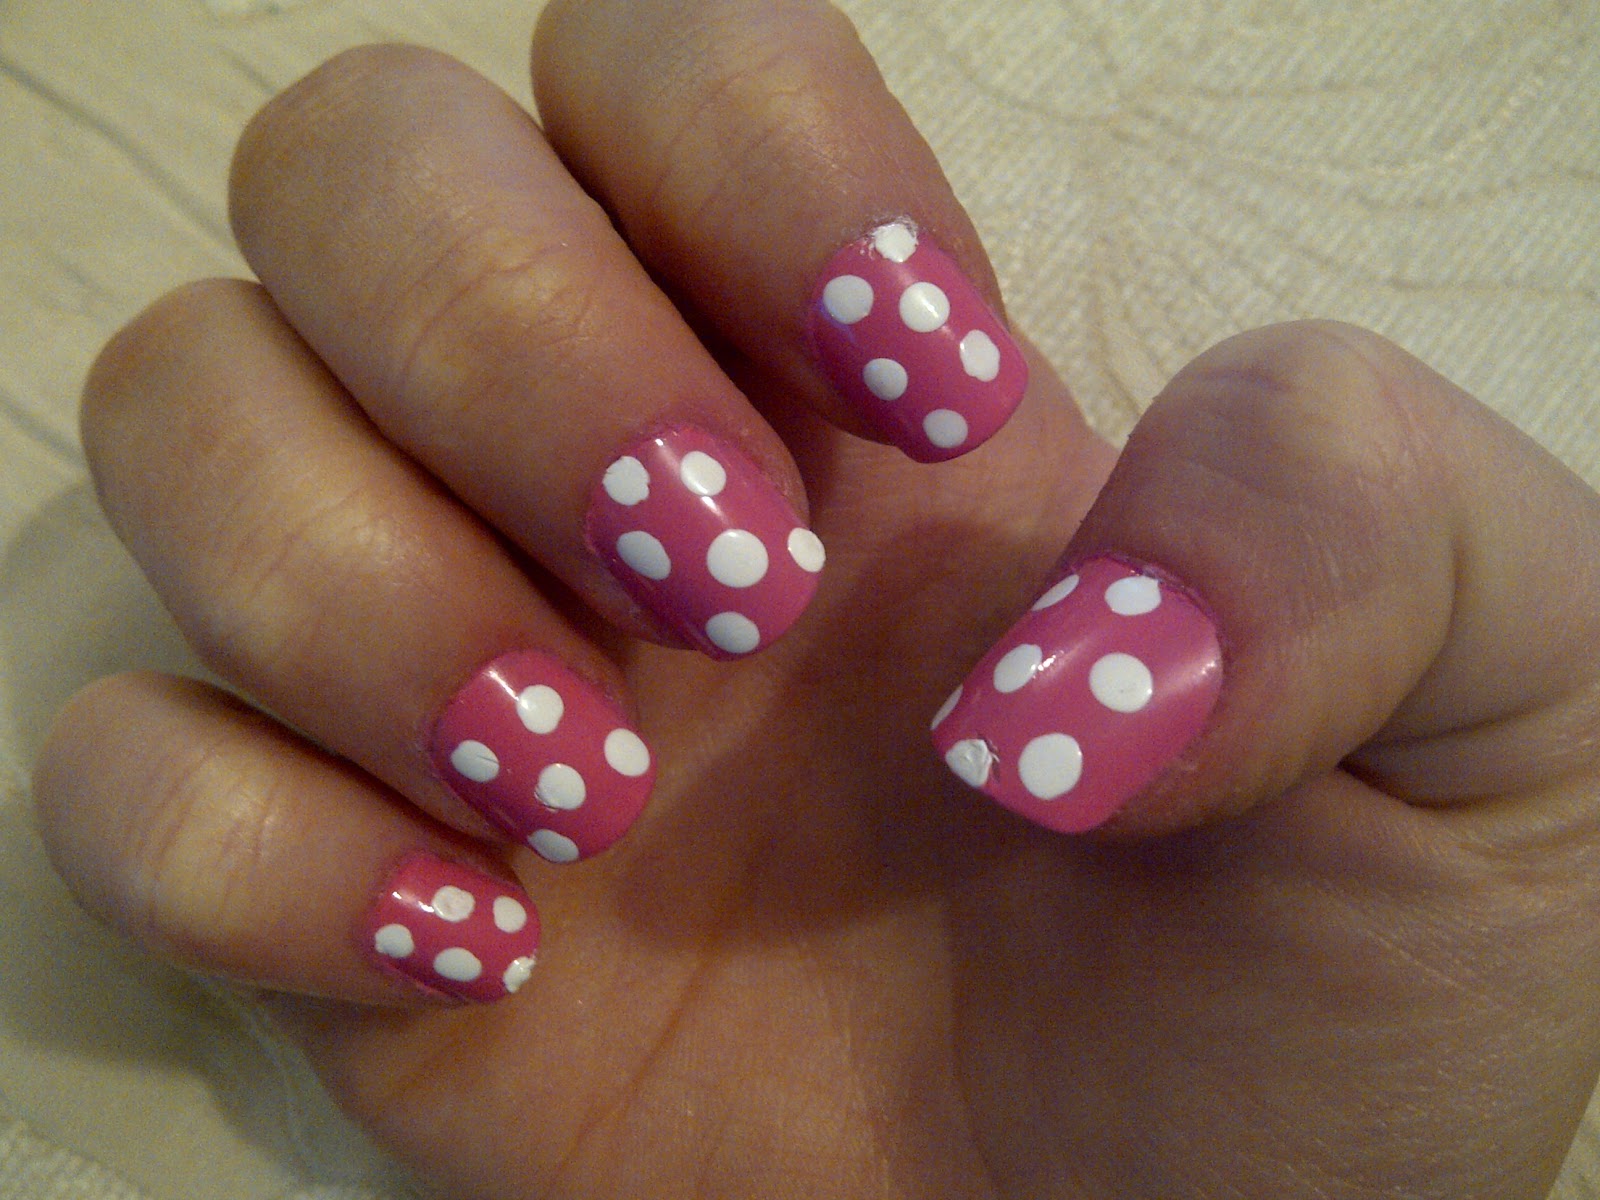 2. Easy Minnie Mouse Nail Art - wide 3